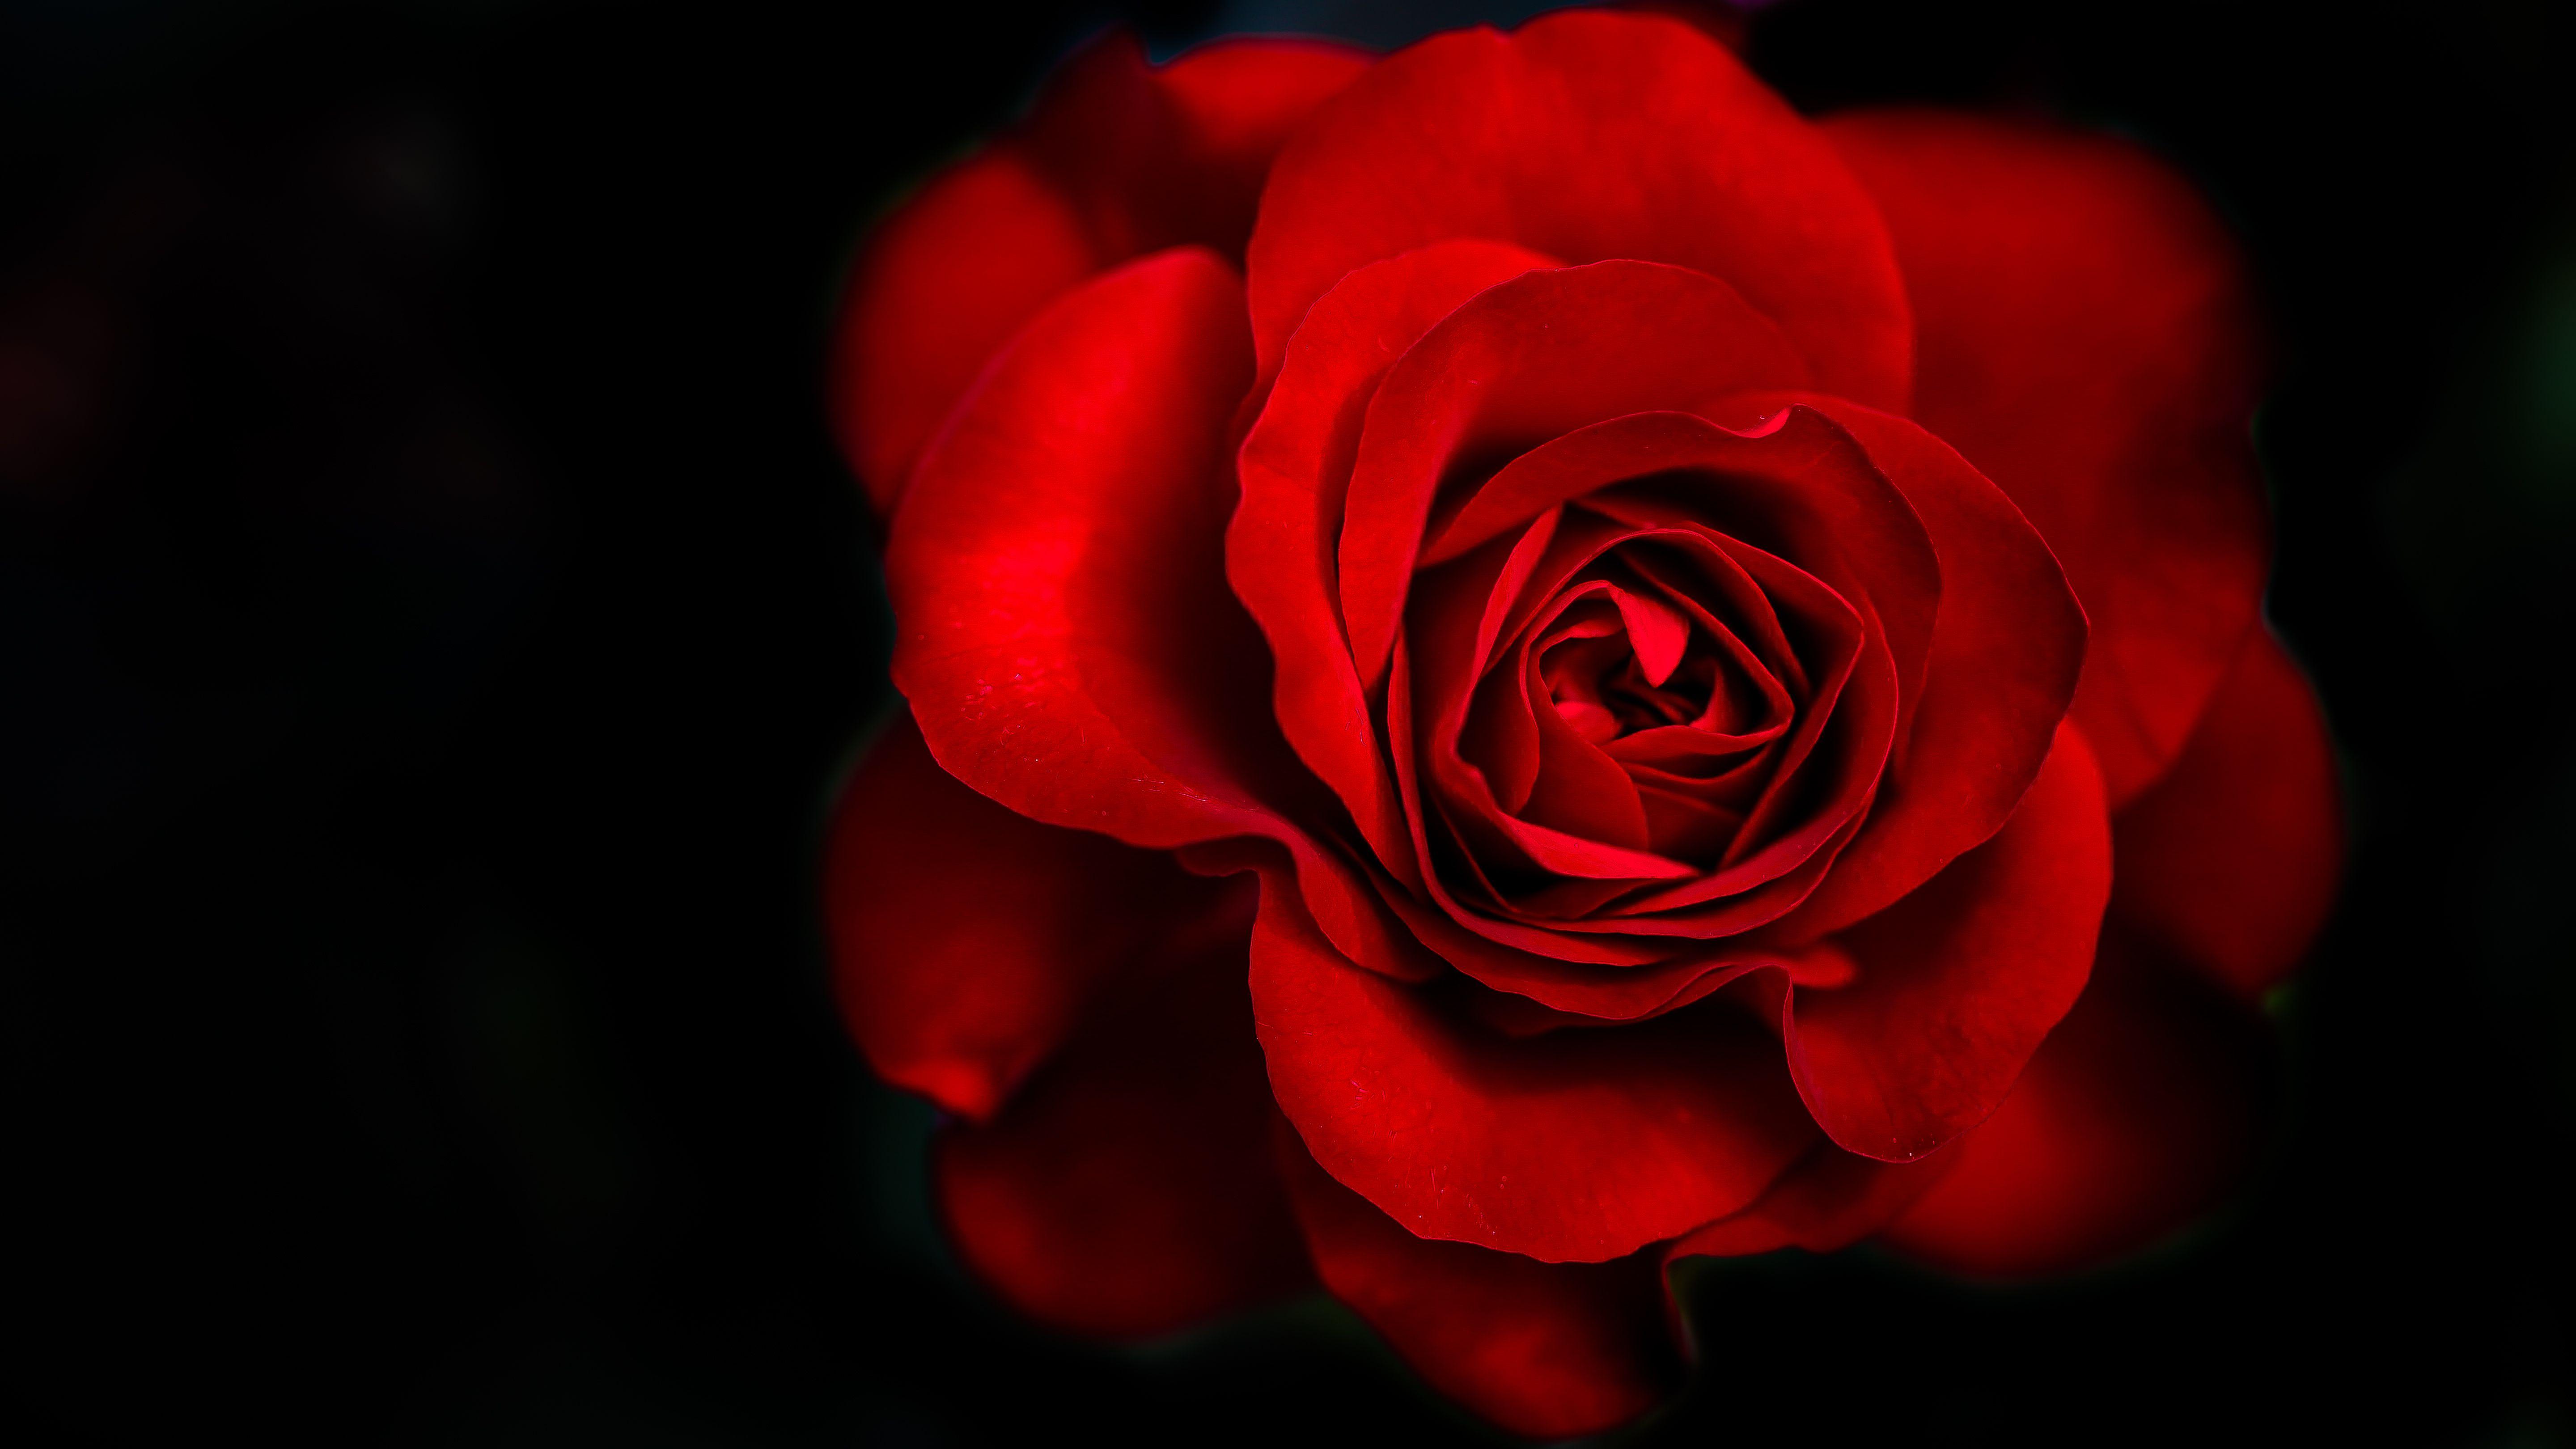 Black And Red Rose Wallpapers - Top Free Black And Red Rose Backgrounds